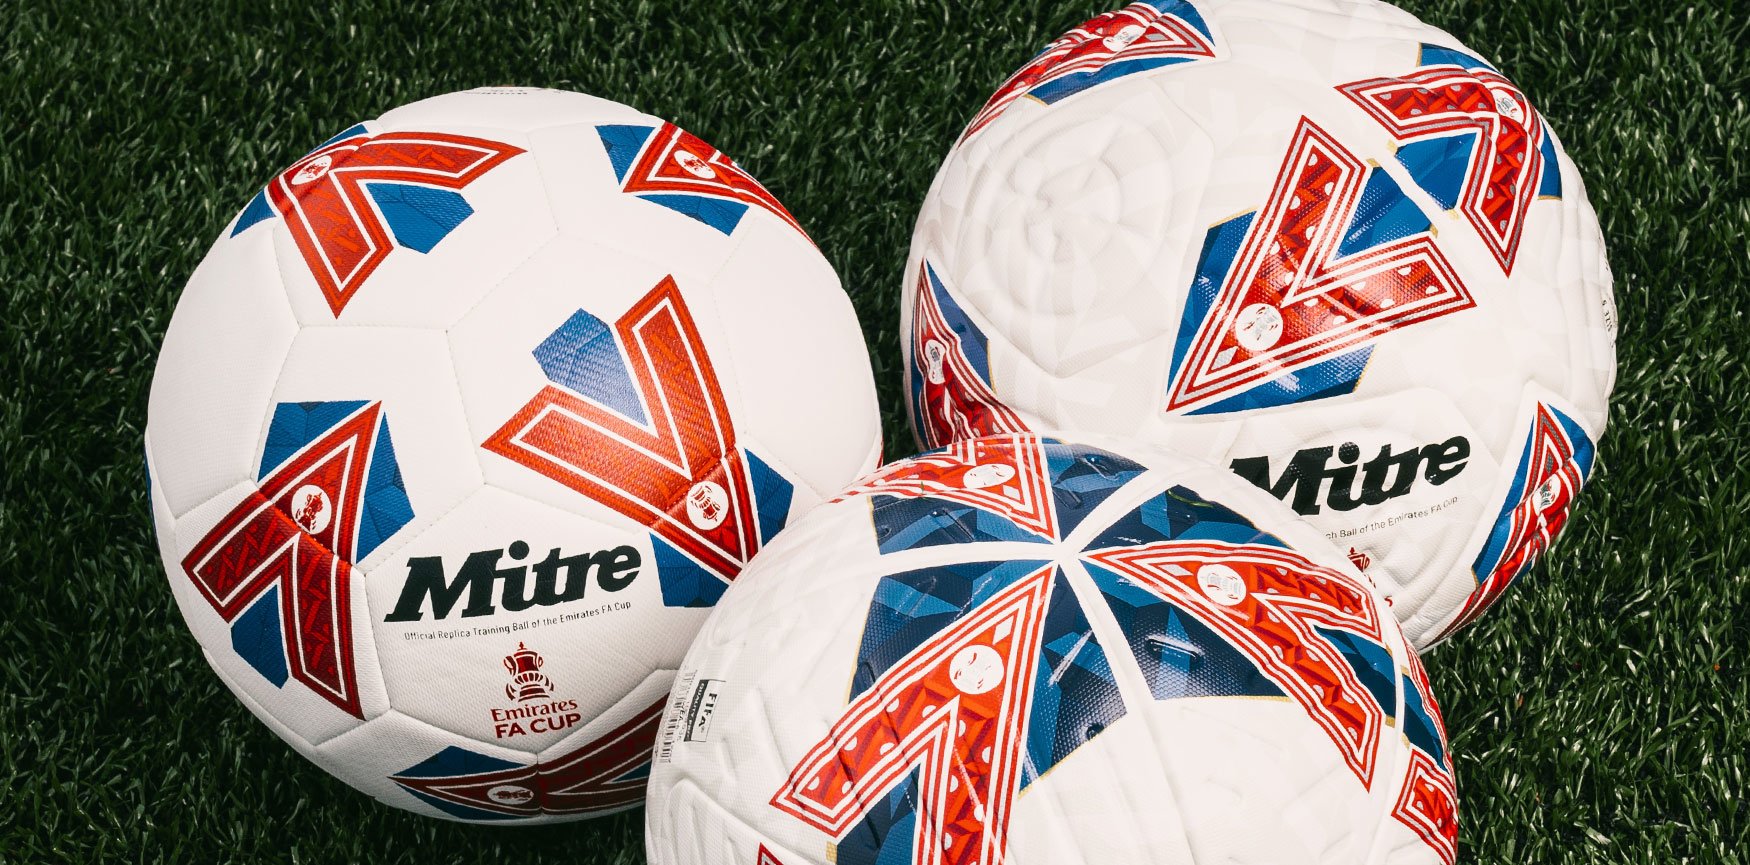 Training Footballs featuring the Mitre Ultimax FA Cup Ball